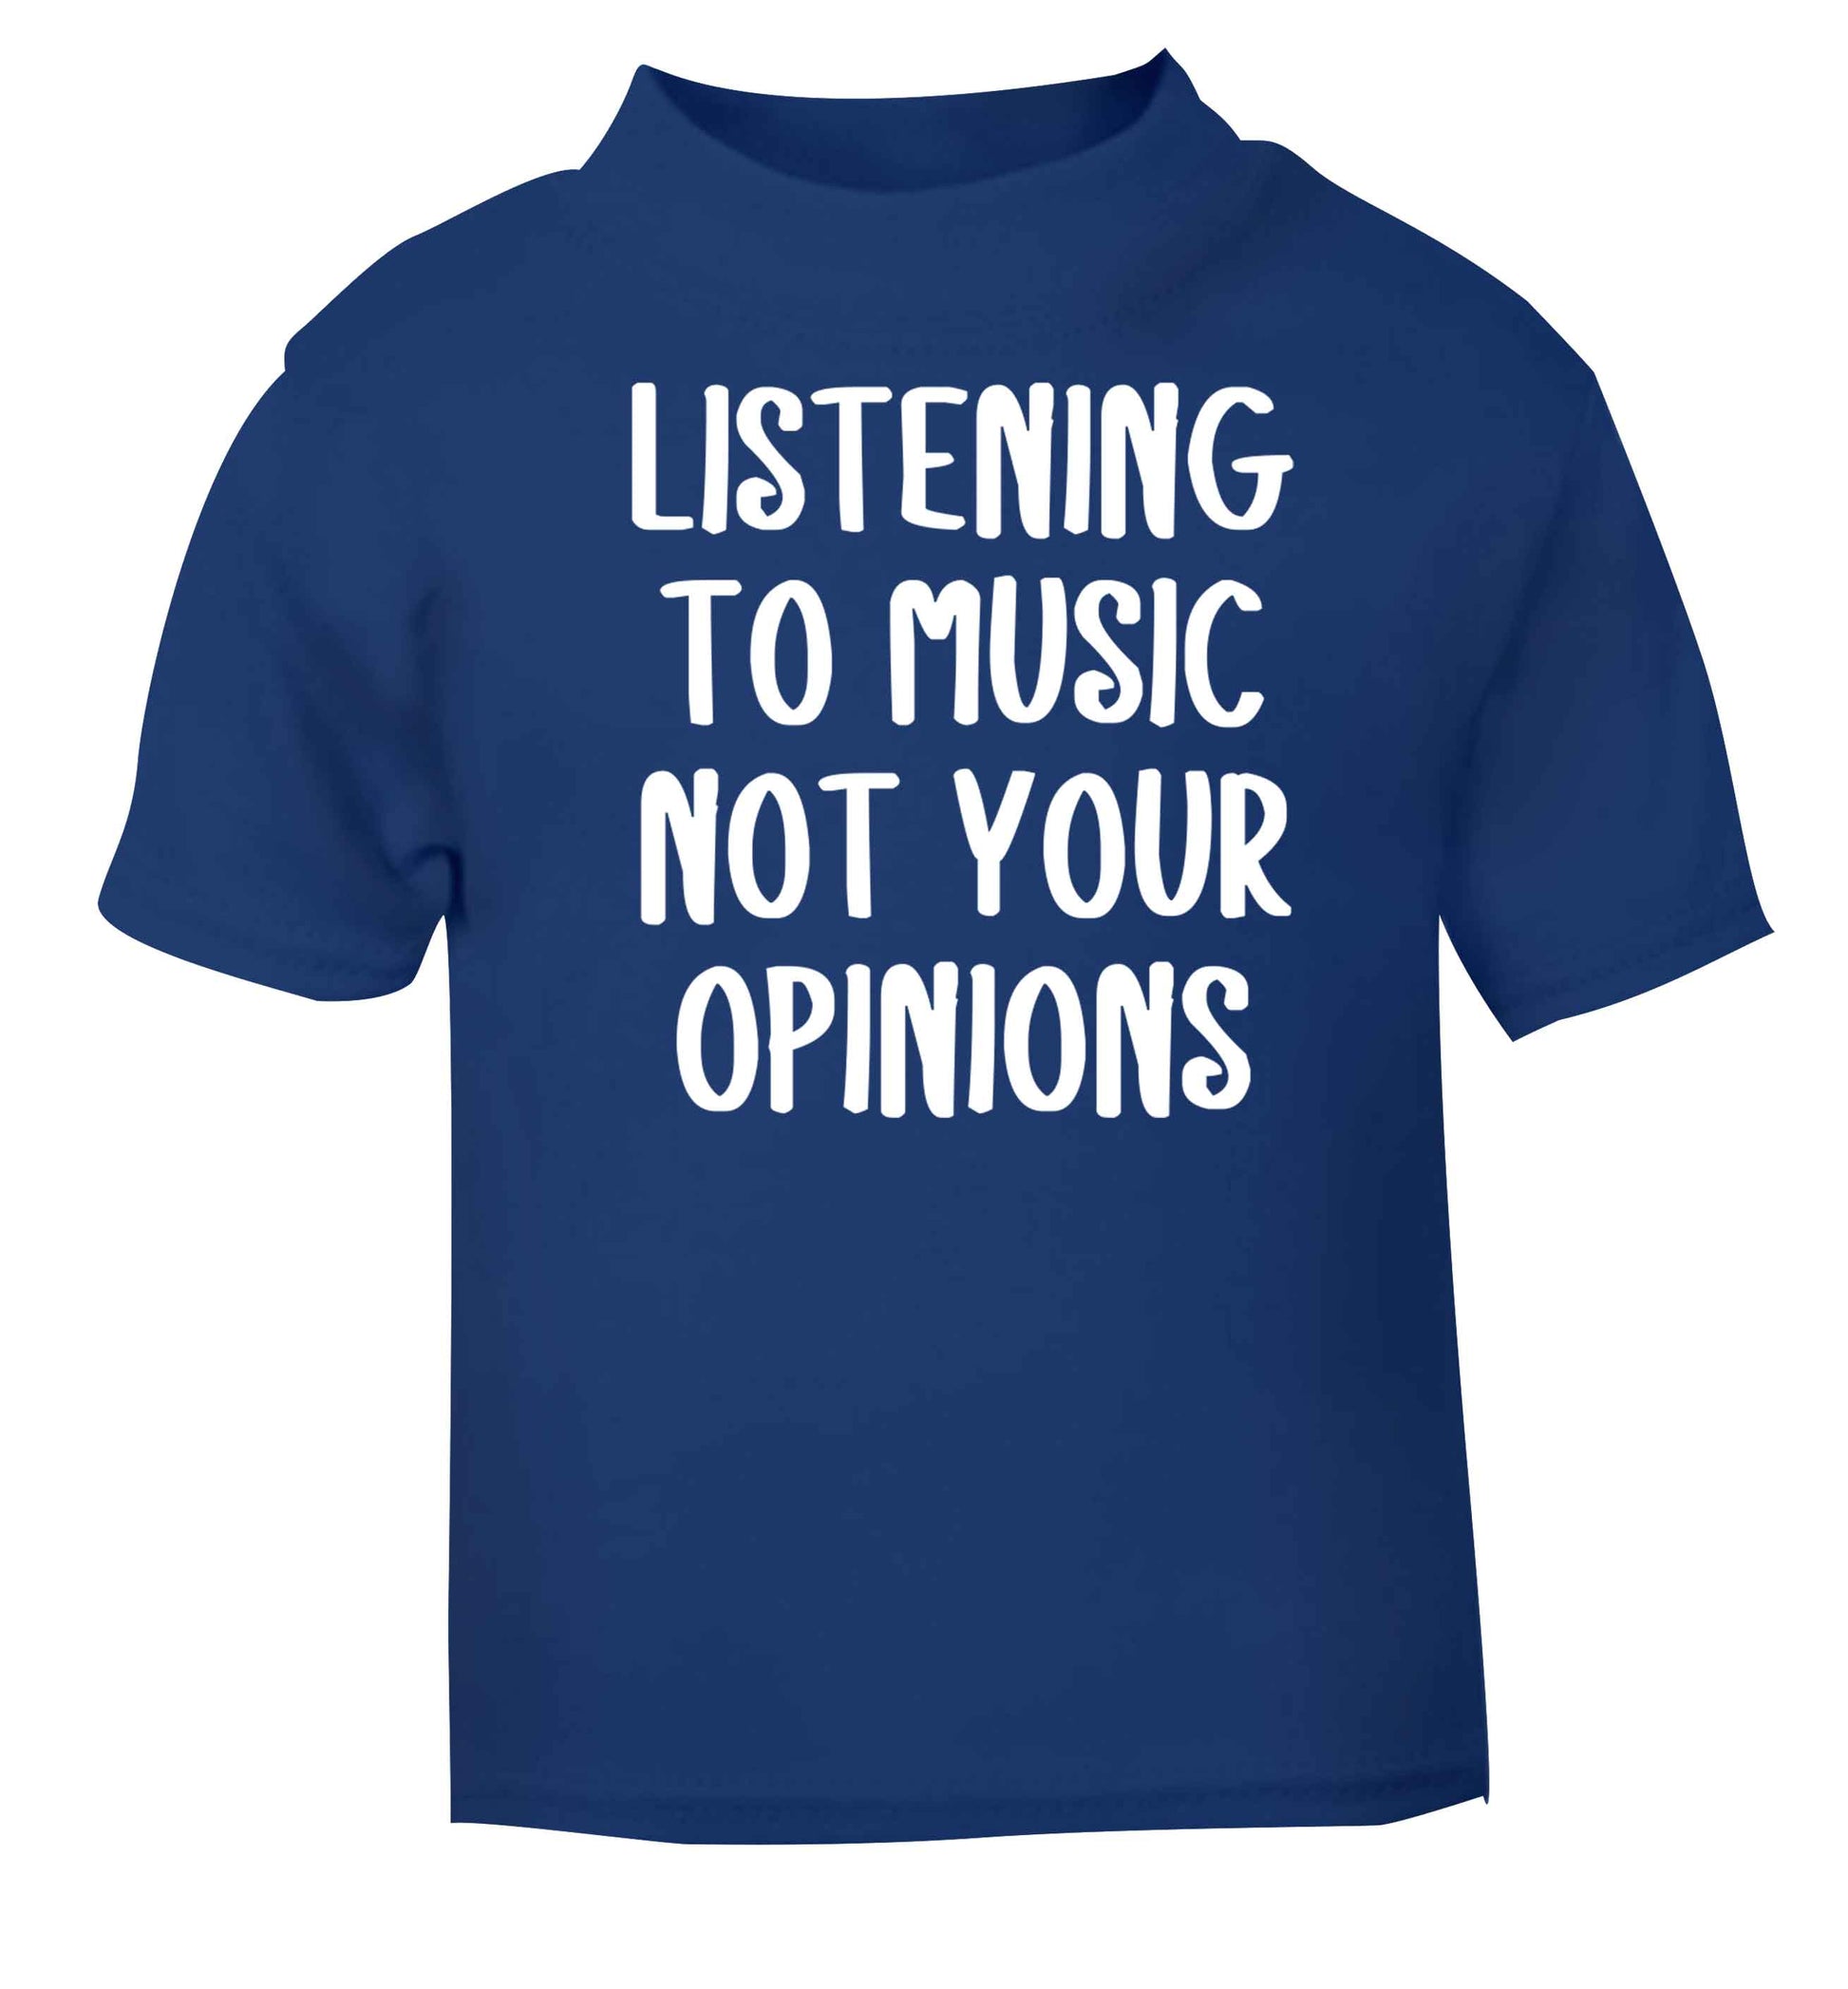 Listening to music not your opinions blue baby toddler Tshirt 2 Years